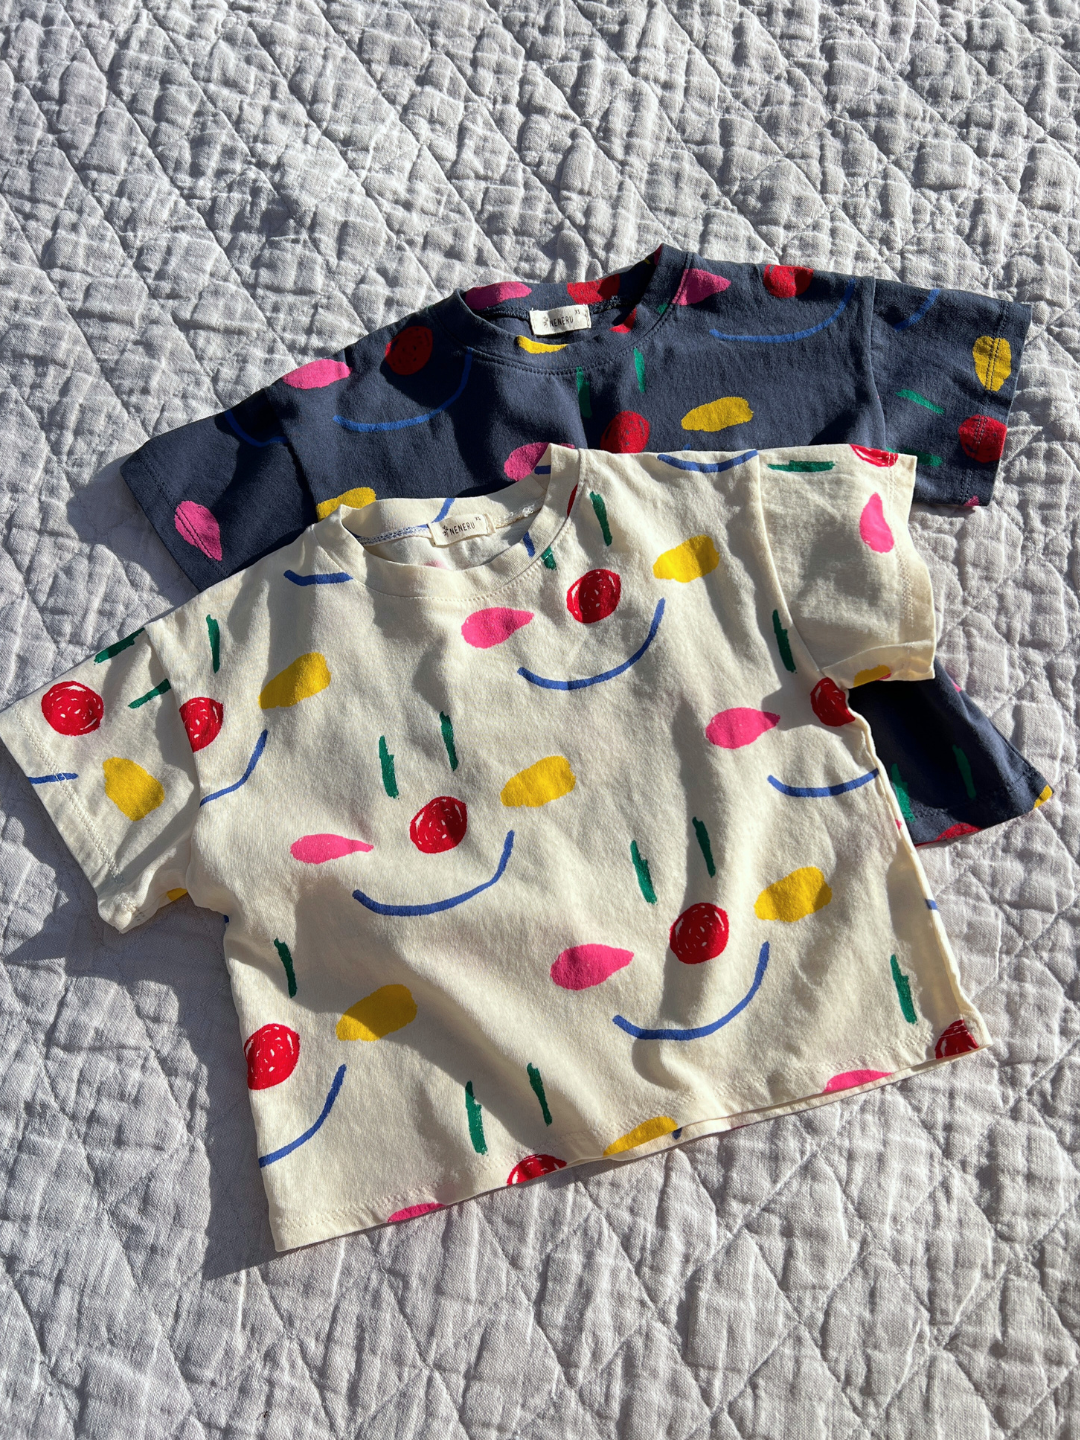 Two kids' Facepaint Tees in Navy and cream laid flat on a quilt in the sun